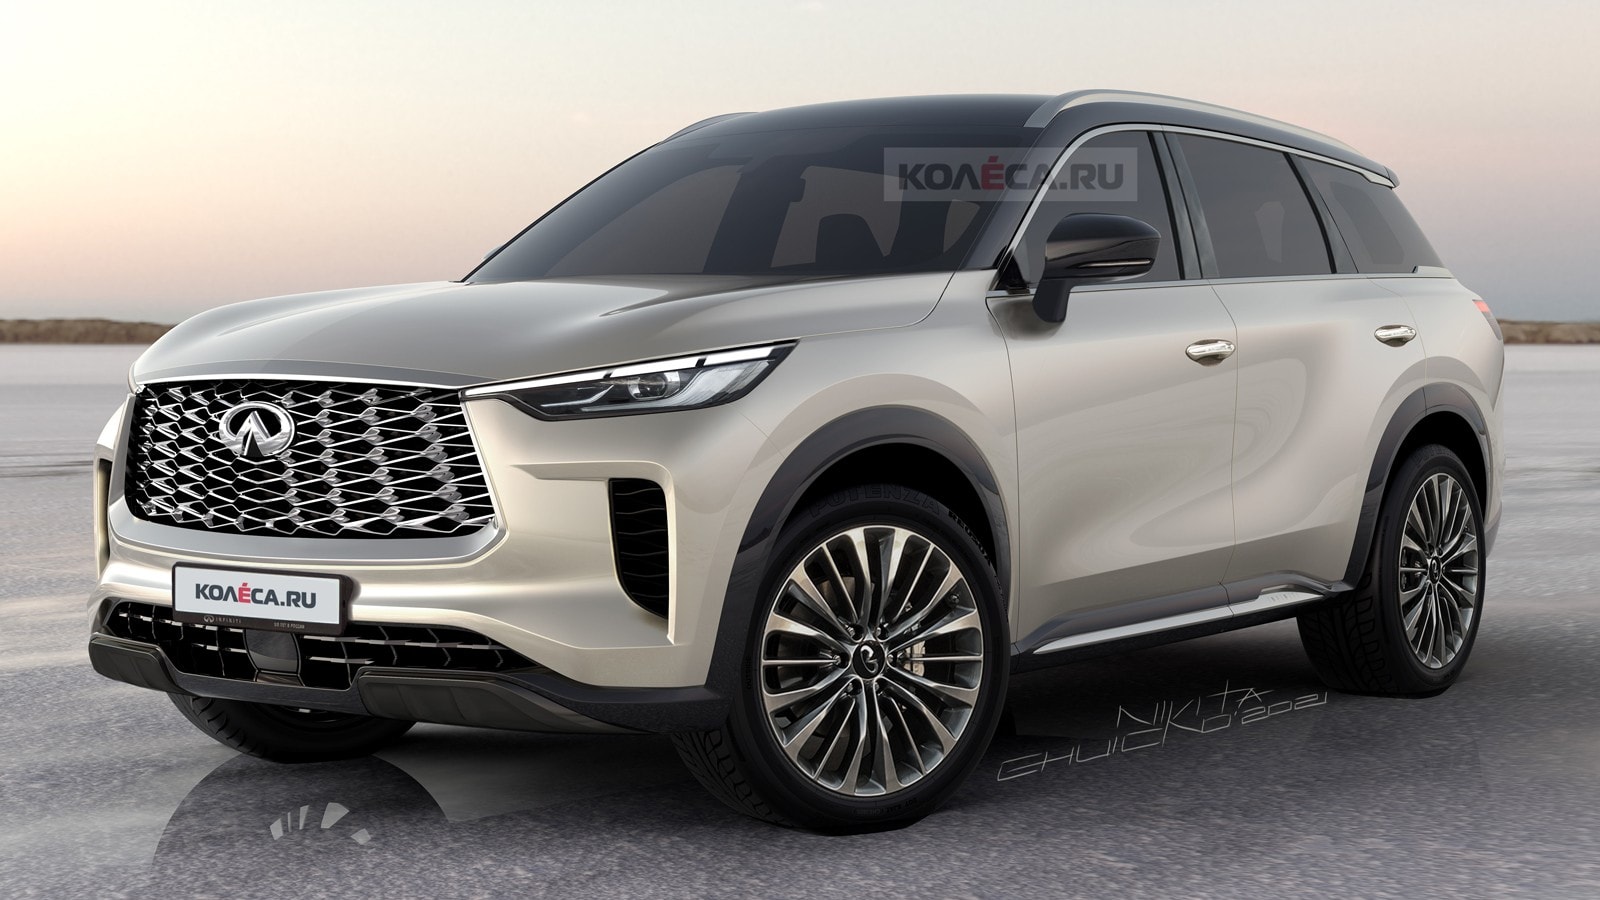 2022 Infiniti Qx60 Looks Impressive In Production Ready Accurate Rendering 156046 1 